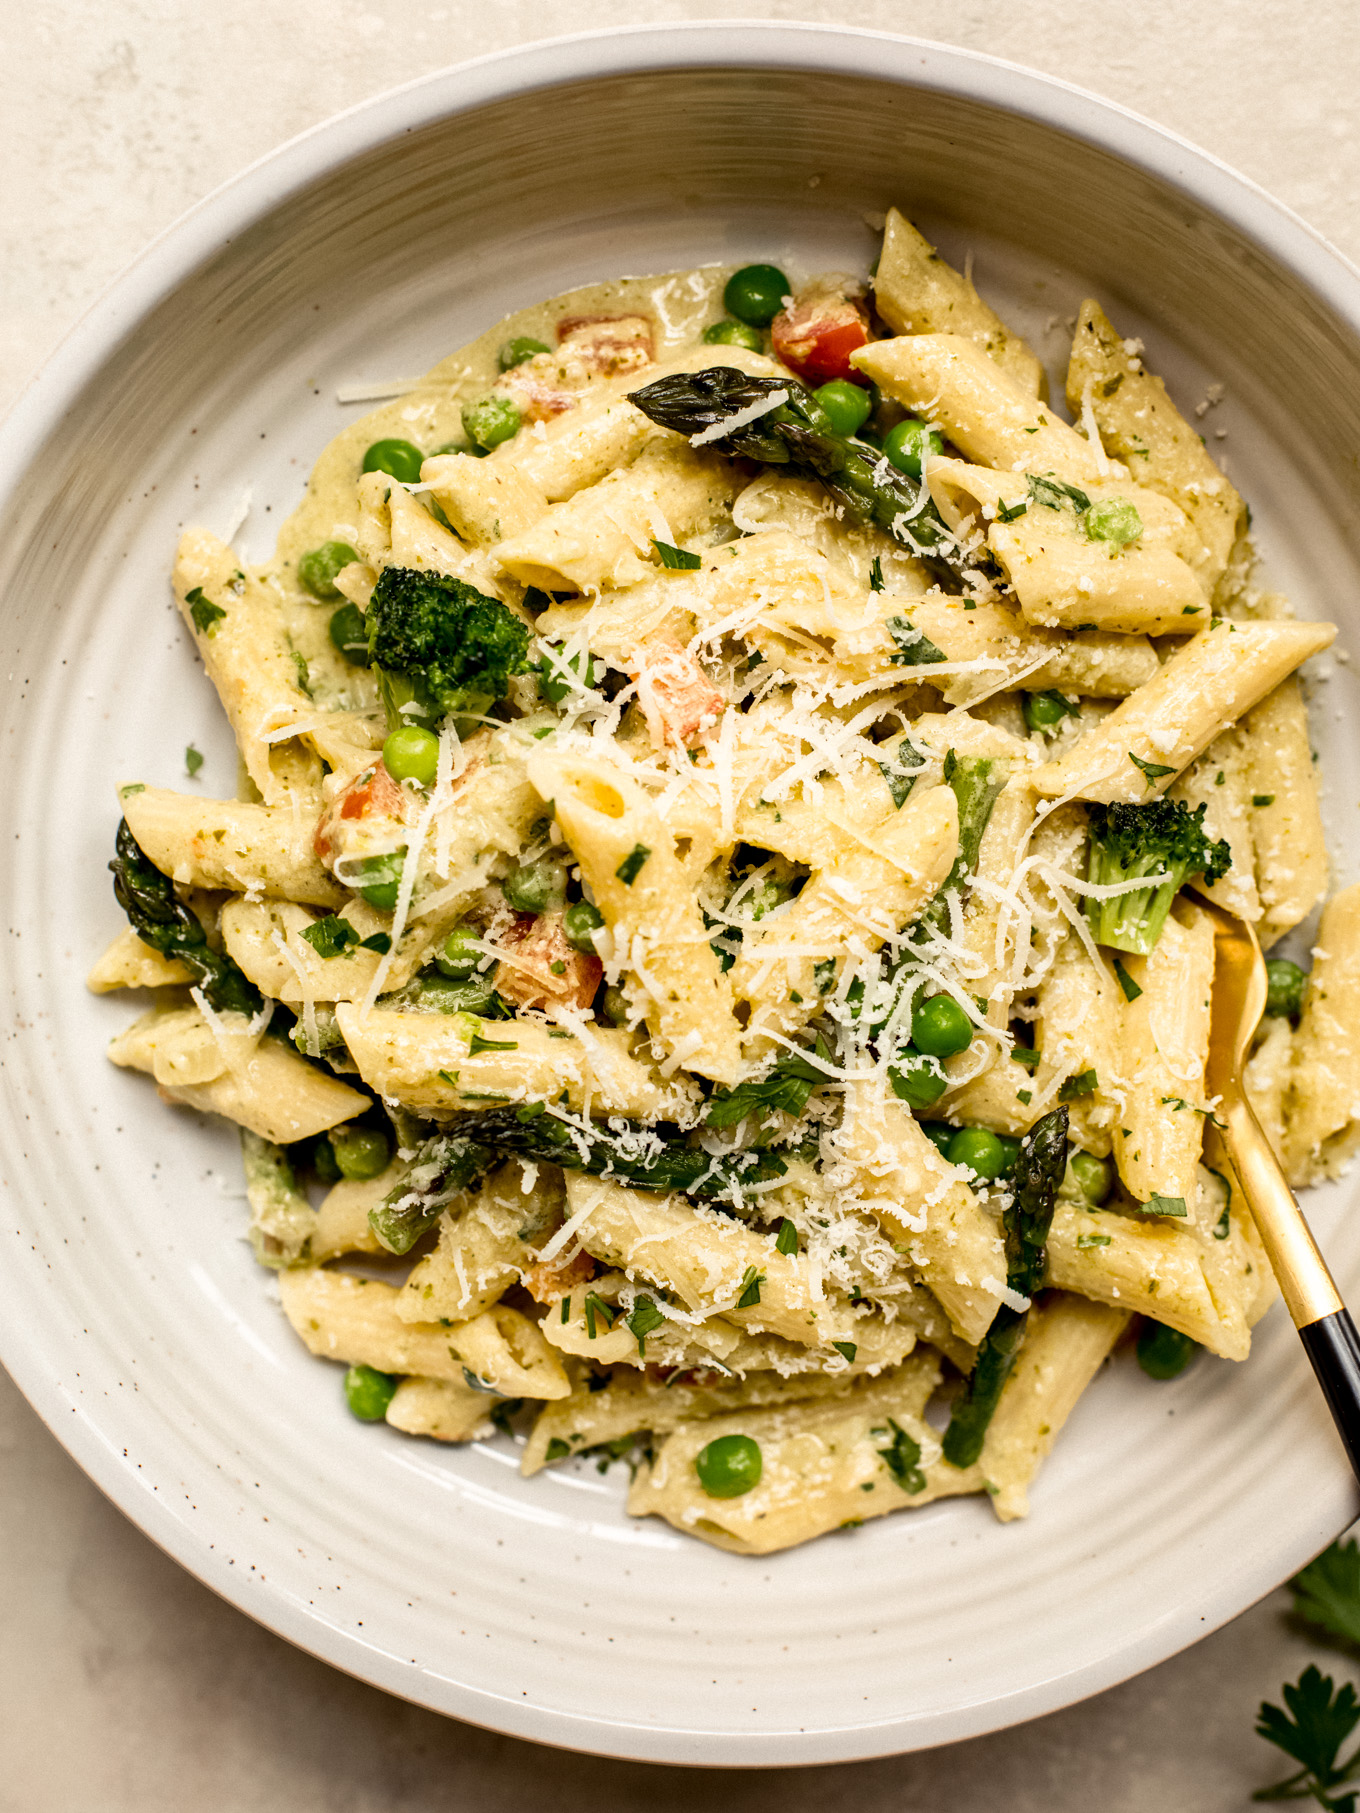 penne pasta with creamy sauce and vegetables in a bowl.